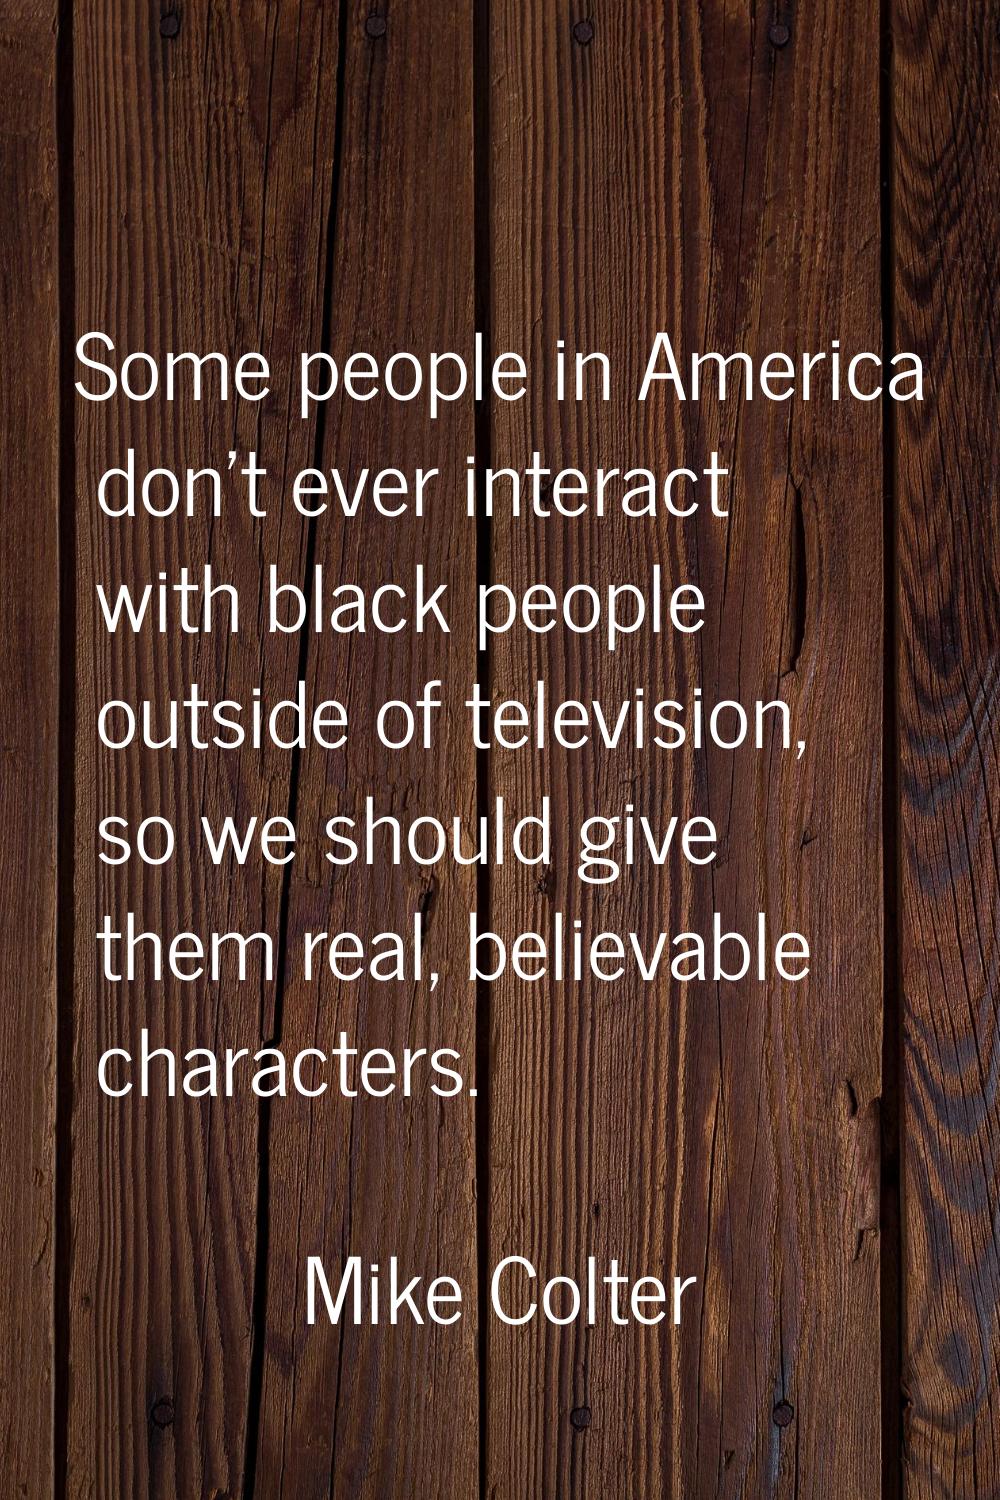 Some people in America don't ever interact with black people outside of television, so we should gi